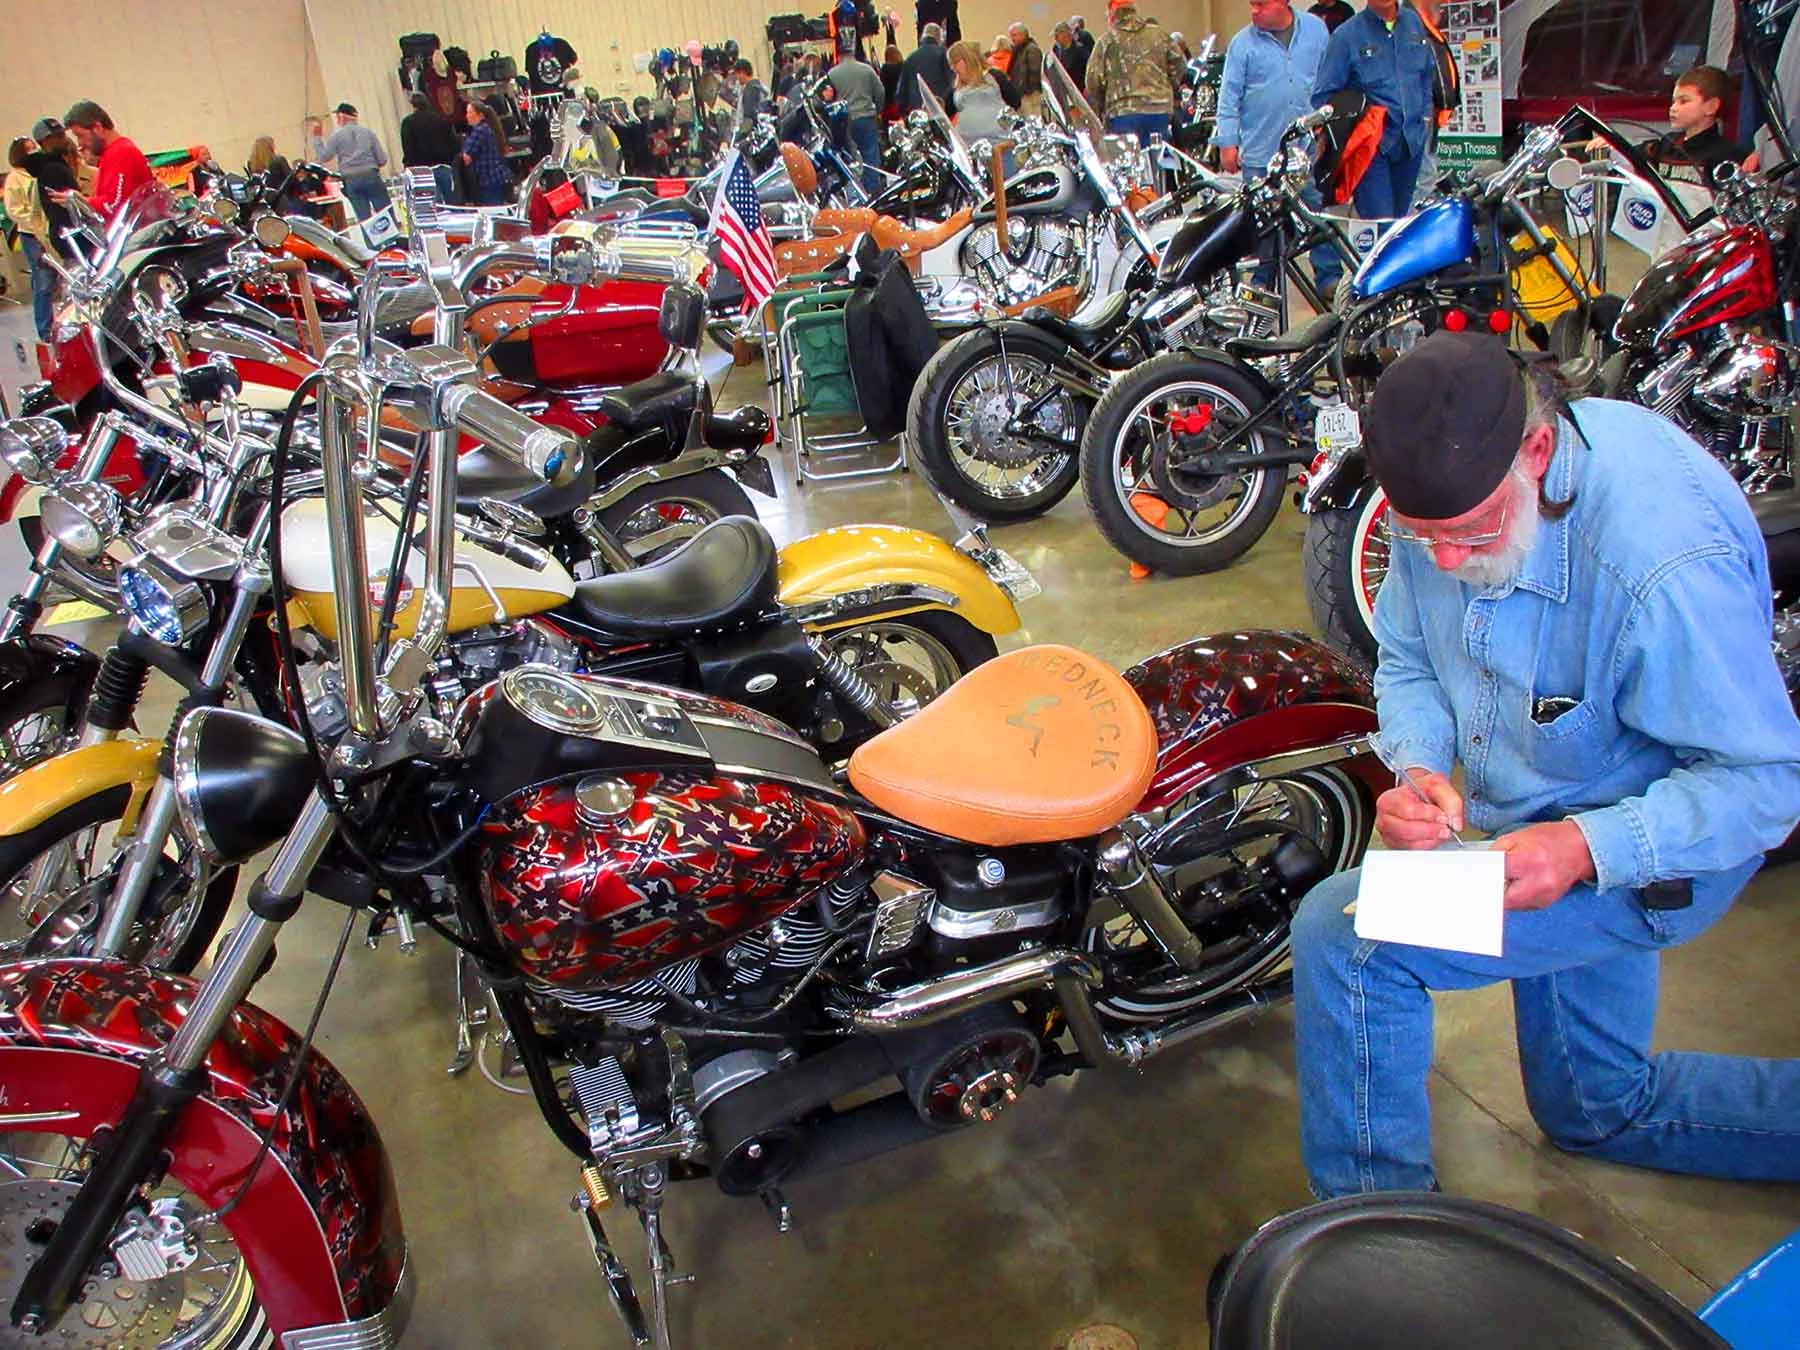 Show Me Bike Show Results Listed